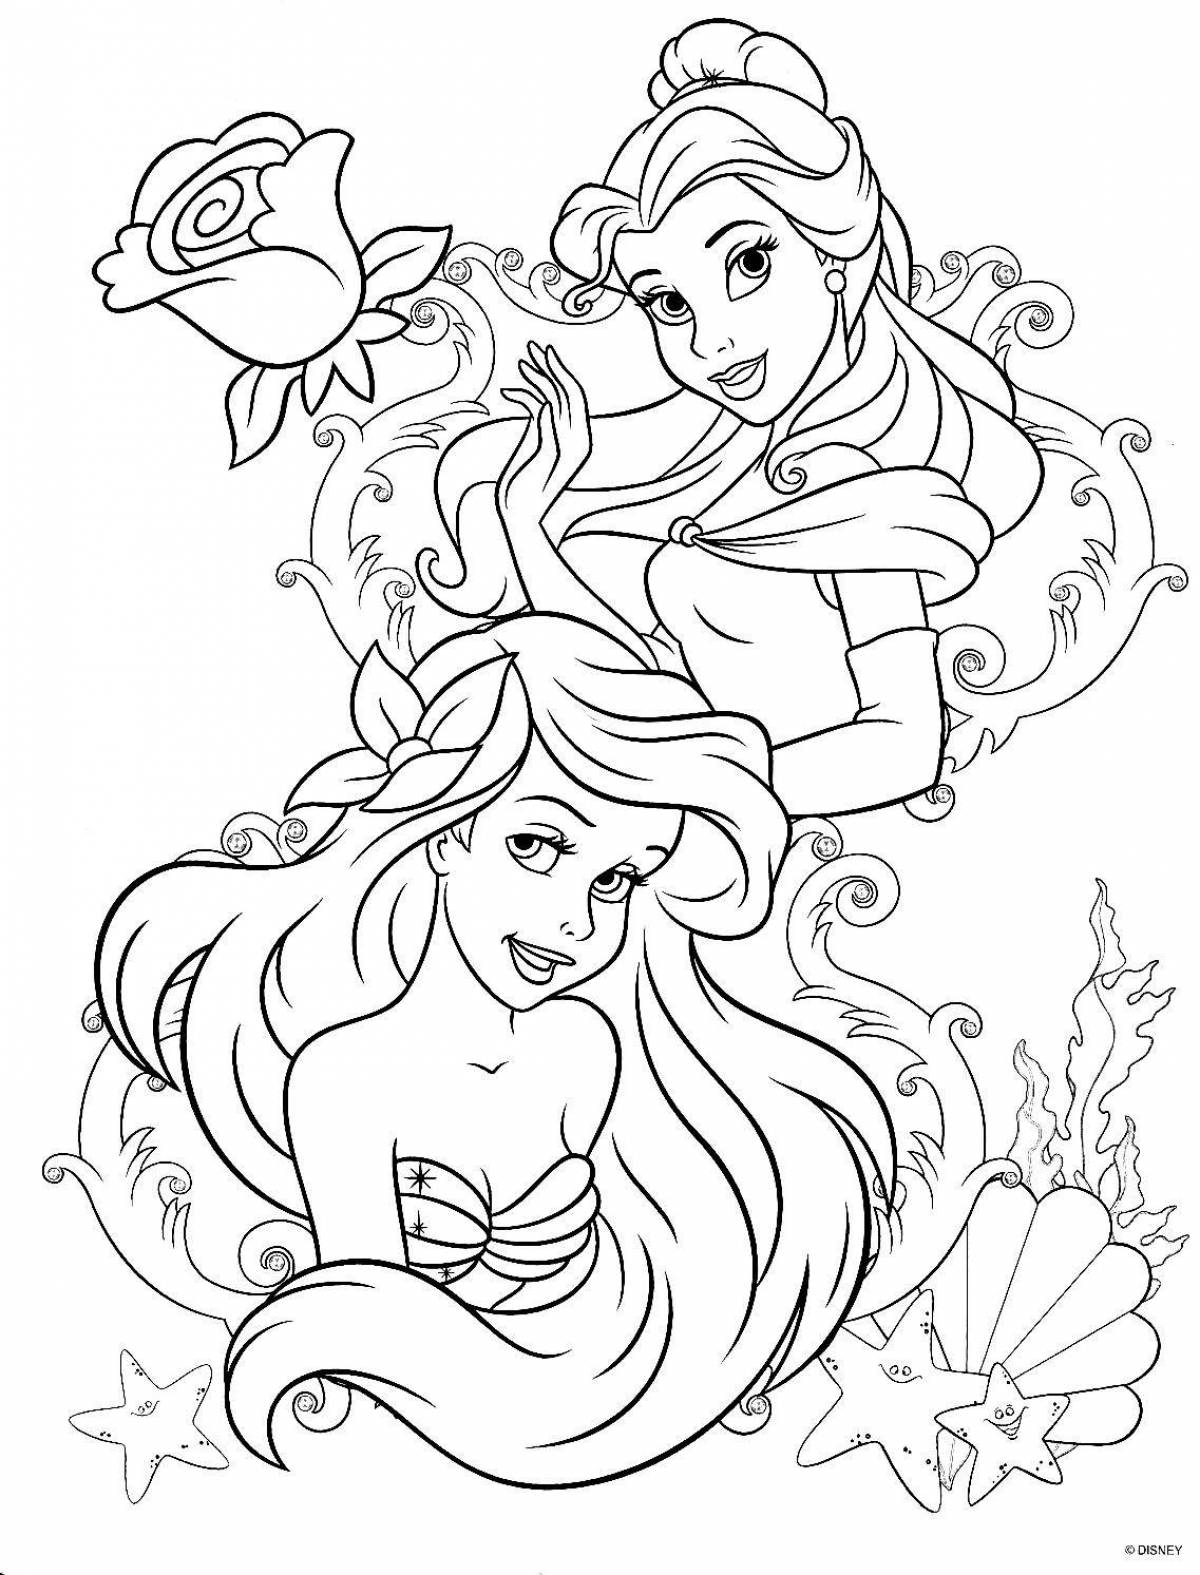 Disney girls style coloring book